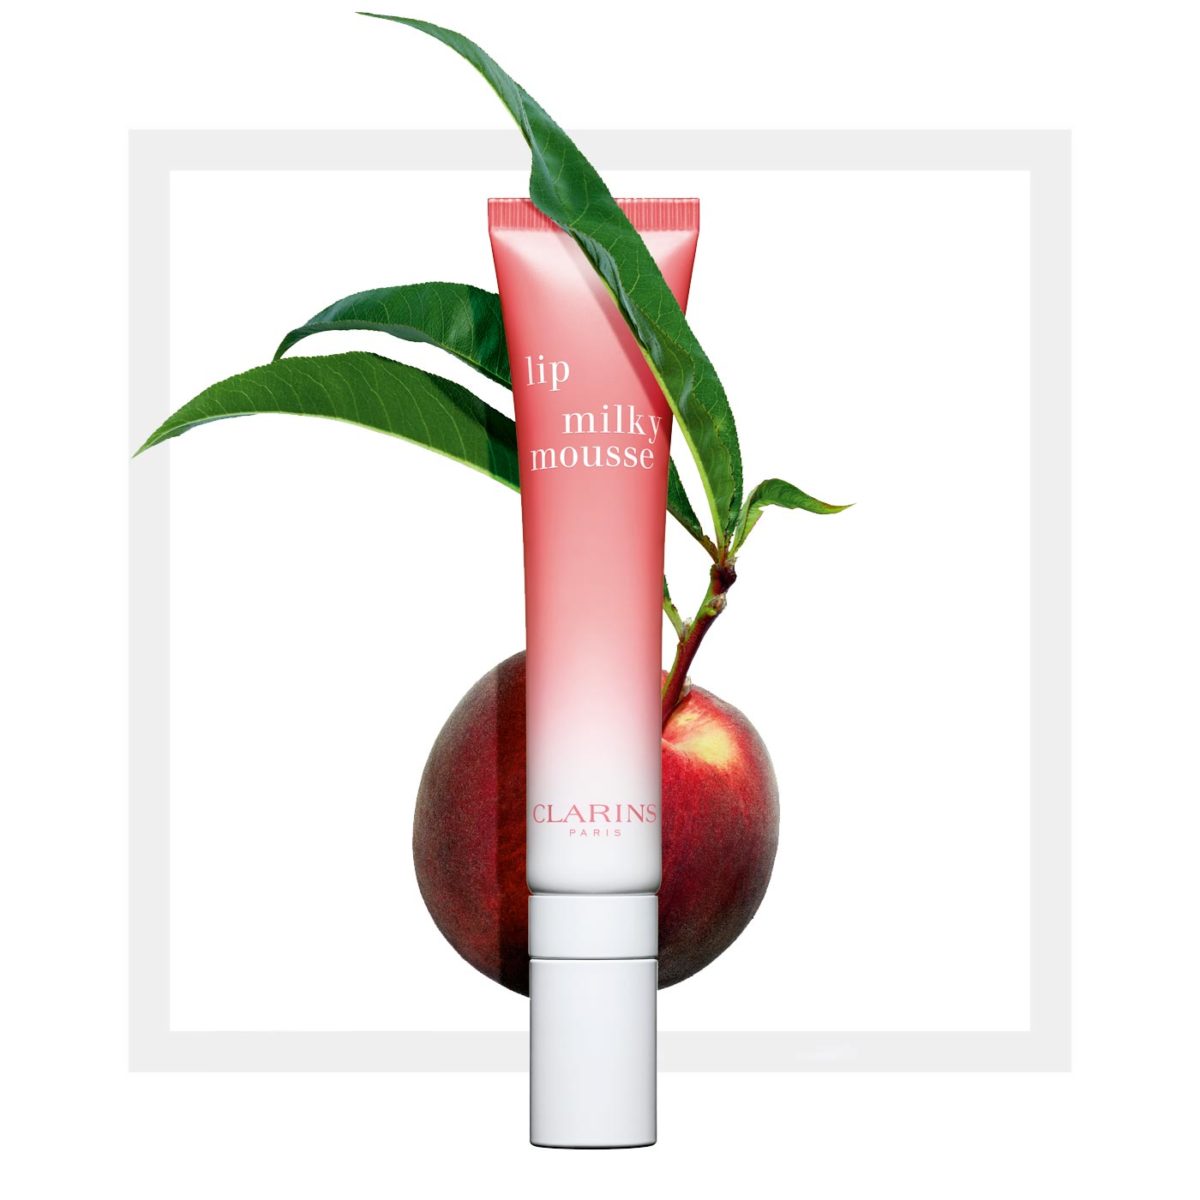 Clarins Milky mousse lips 03 pink 10 ml